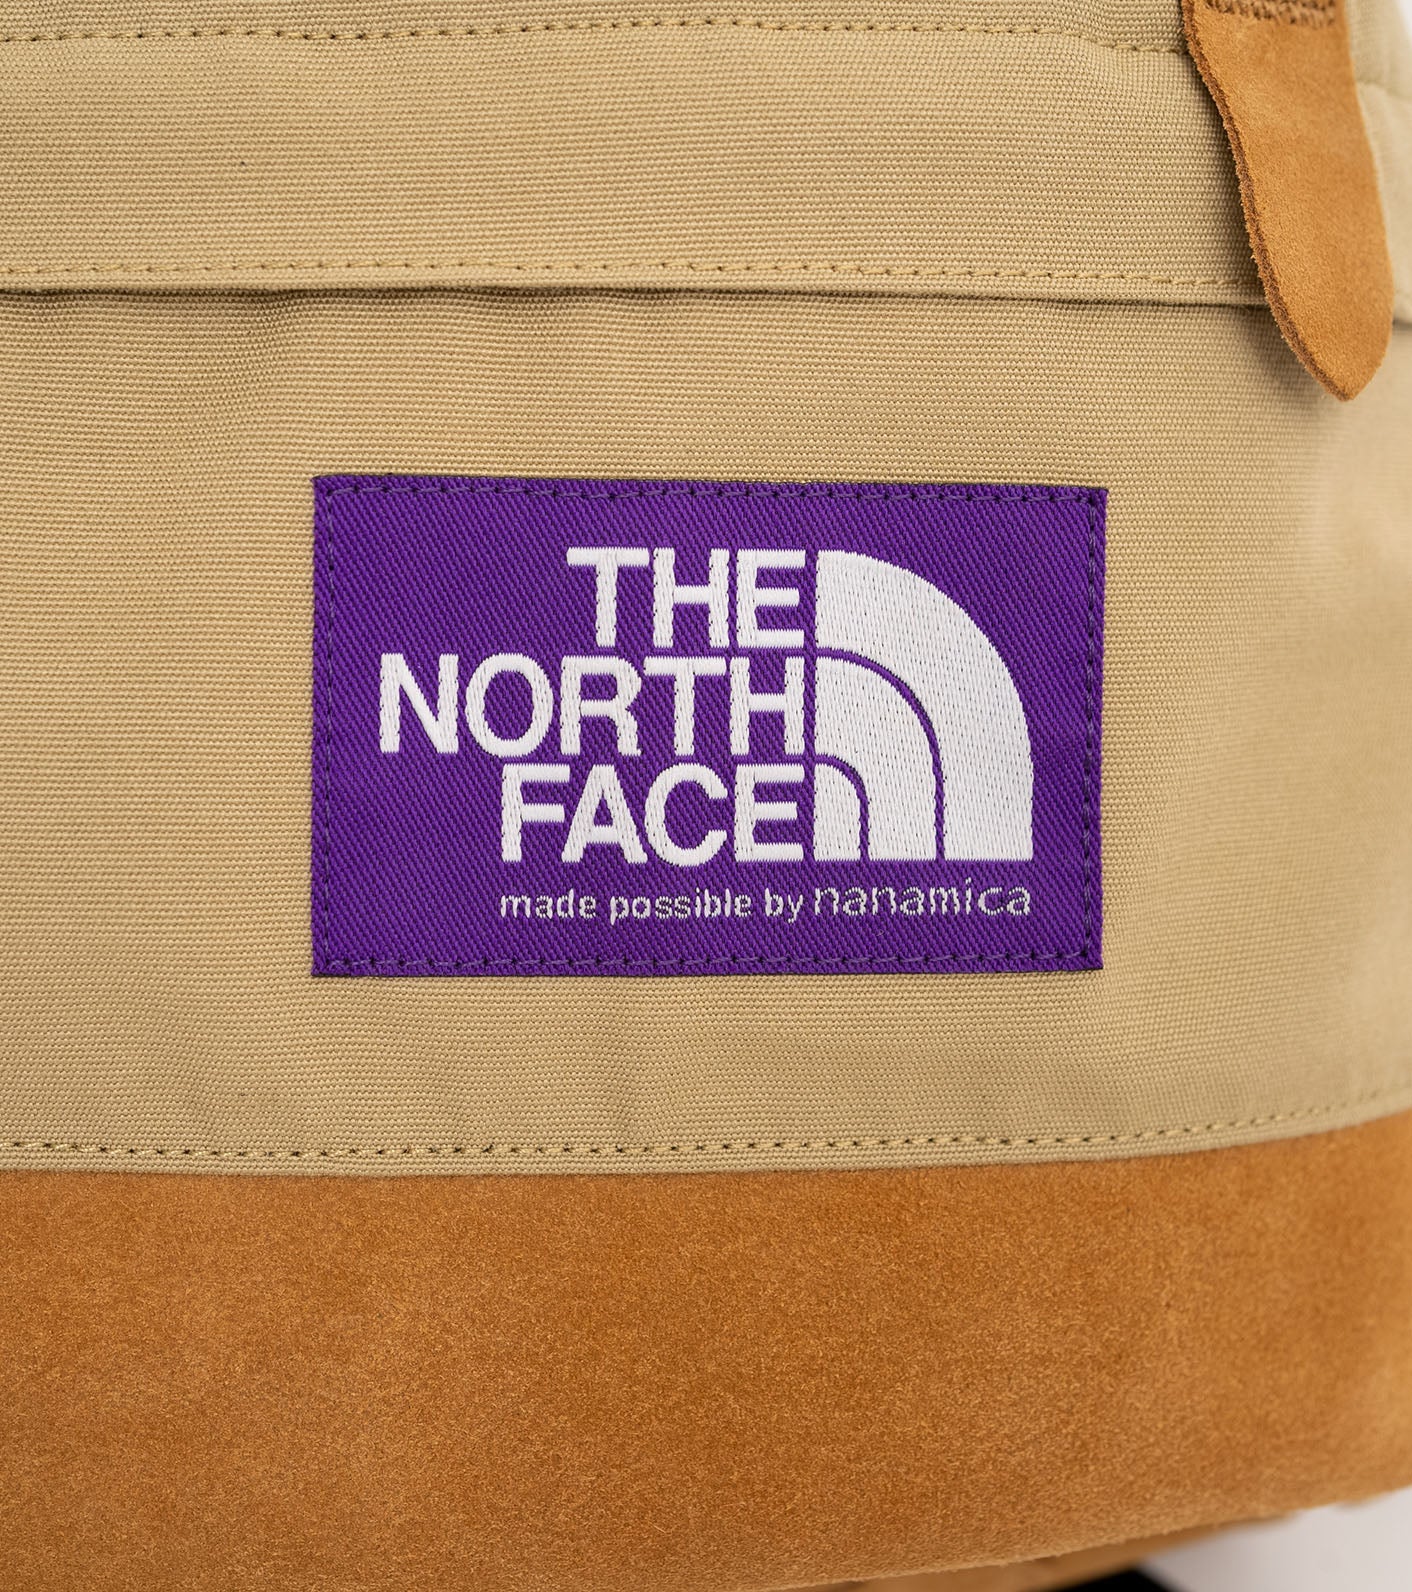 THE NORTH FACE PURPLE LABEL Medium Day Pack